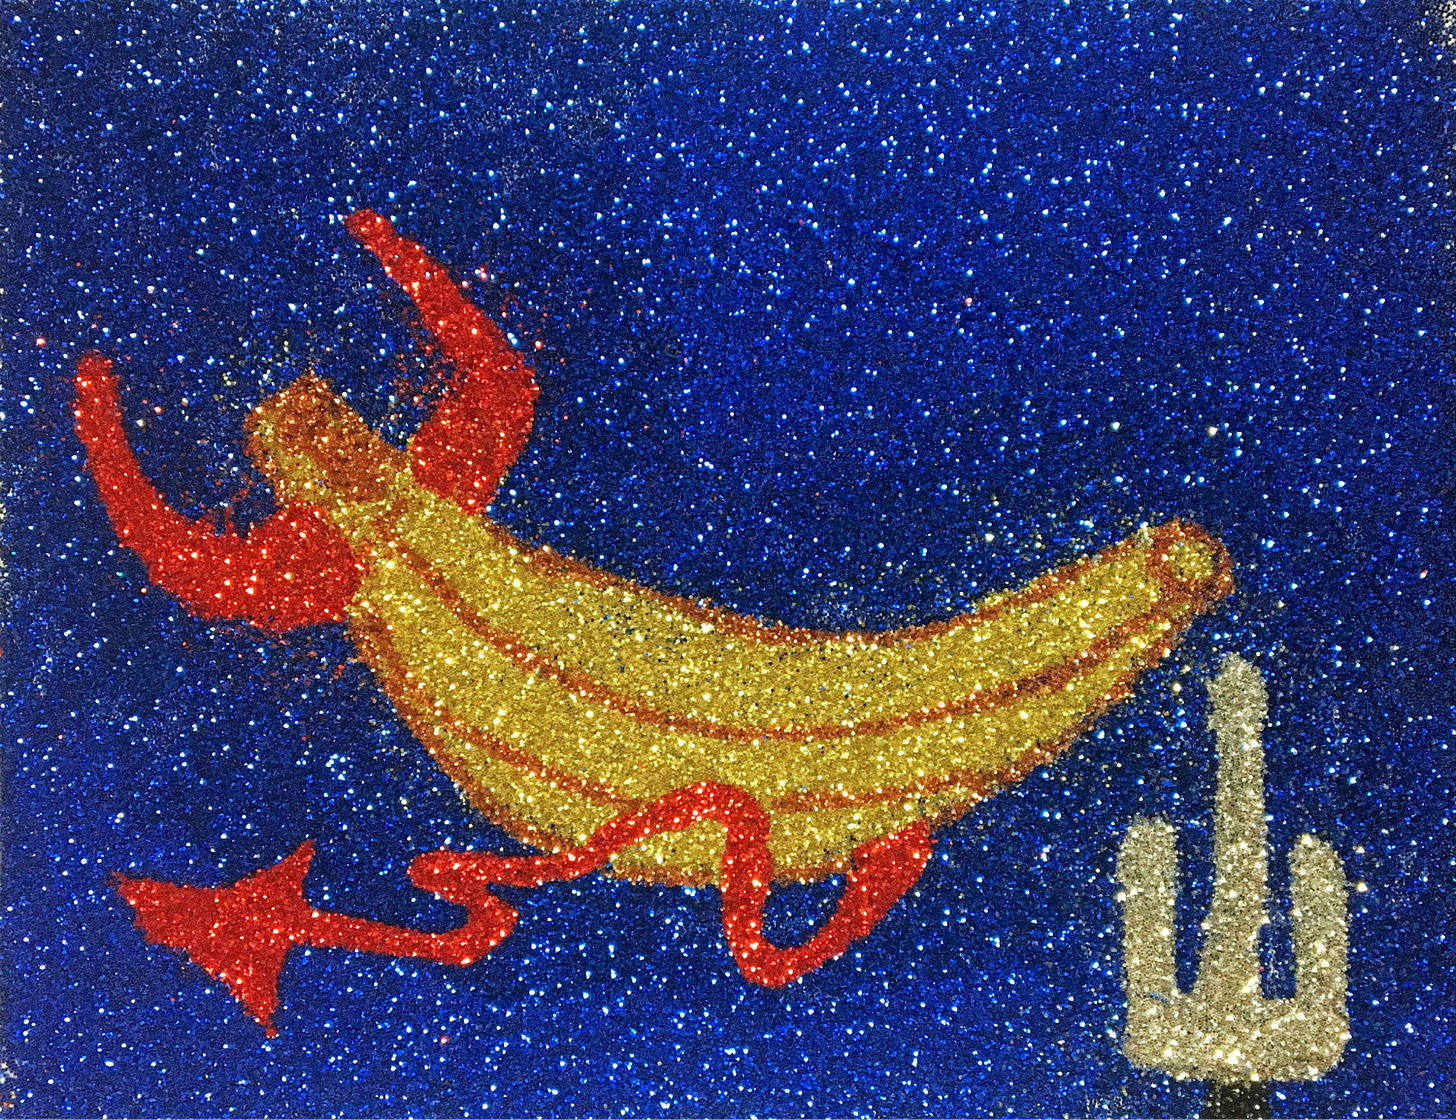 A banana with devil horns and a tail lies on its back against a deep sky next to a cactus.